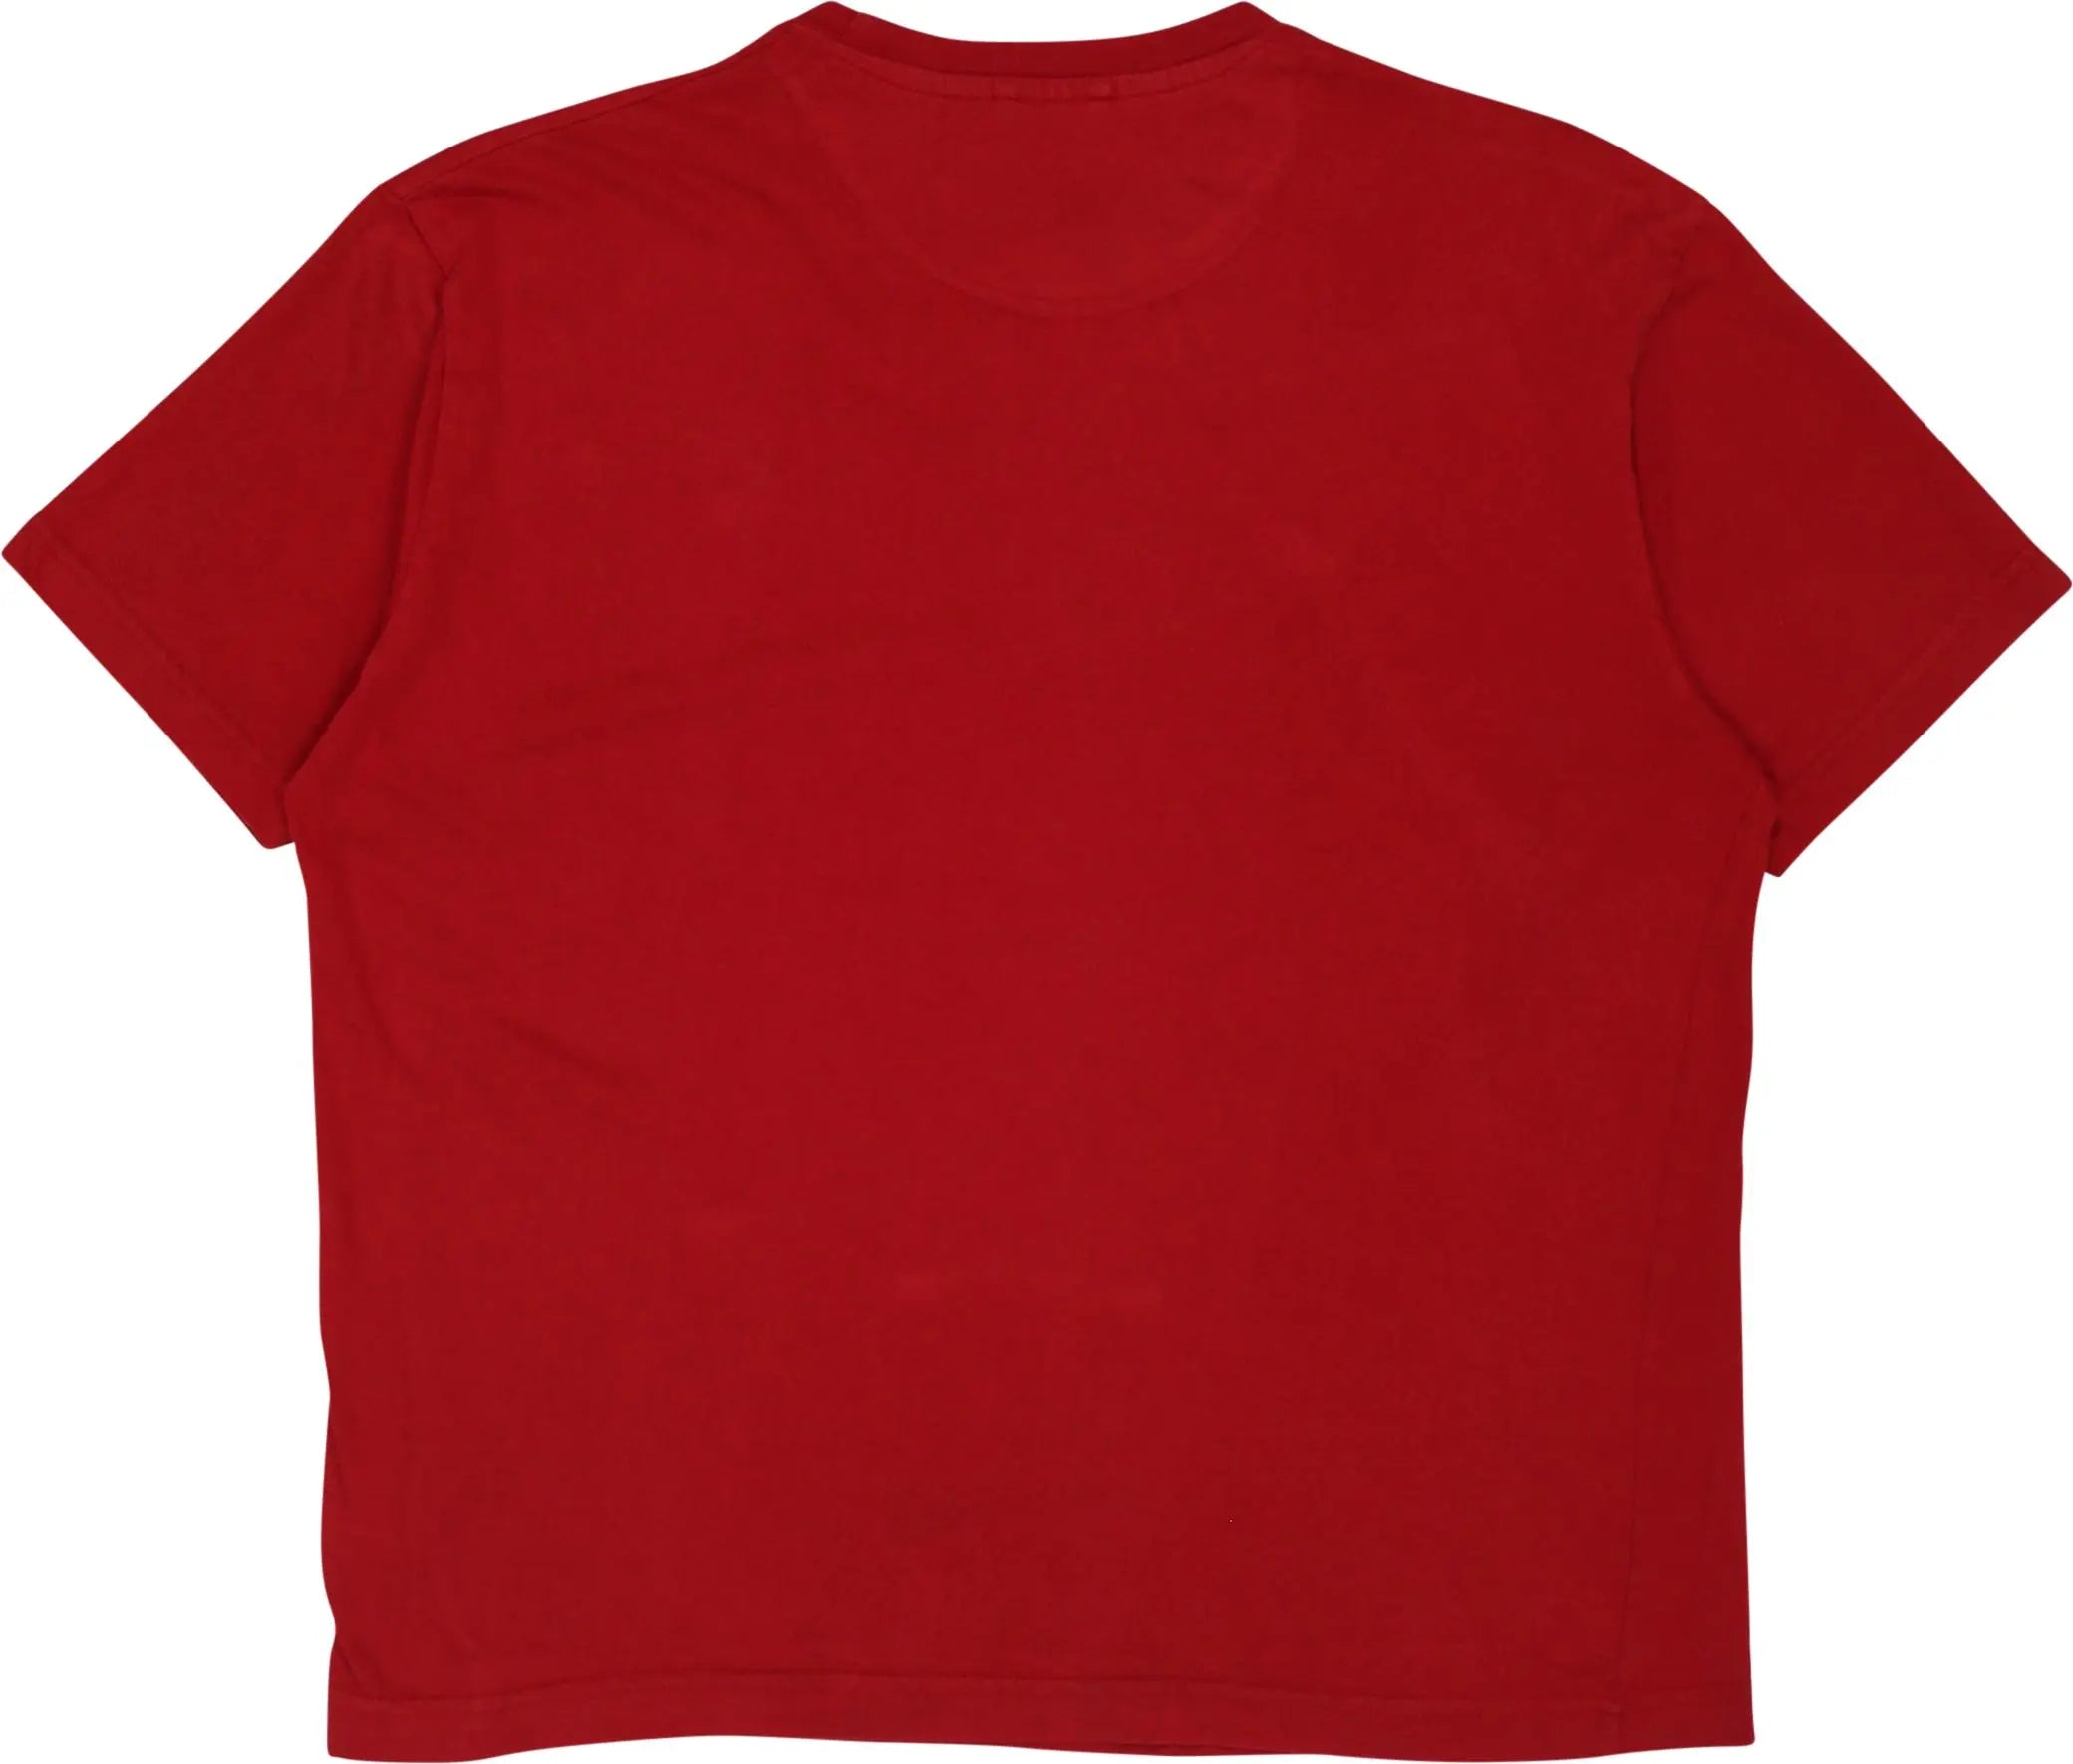 C. Comberti - Red T-shirt by C. Comberti- ThriftTale.com - Vintage and second handclothing